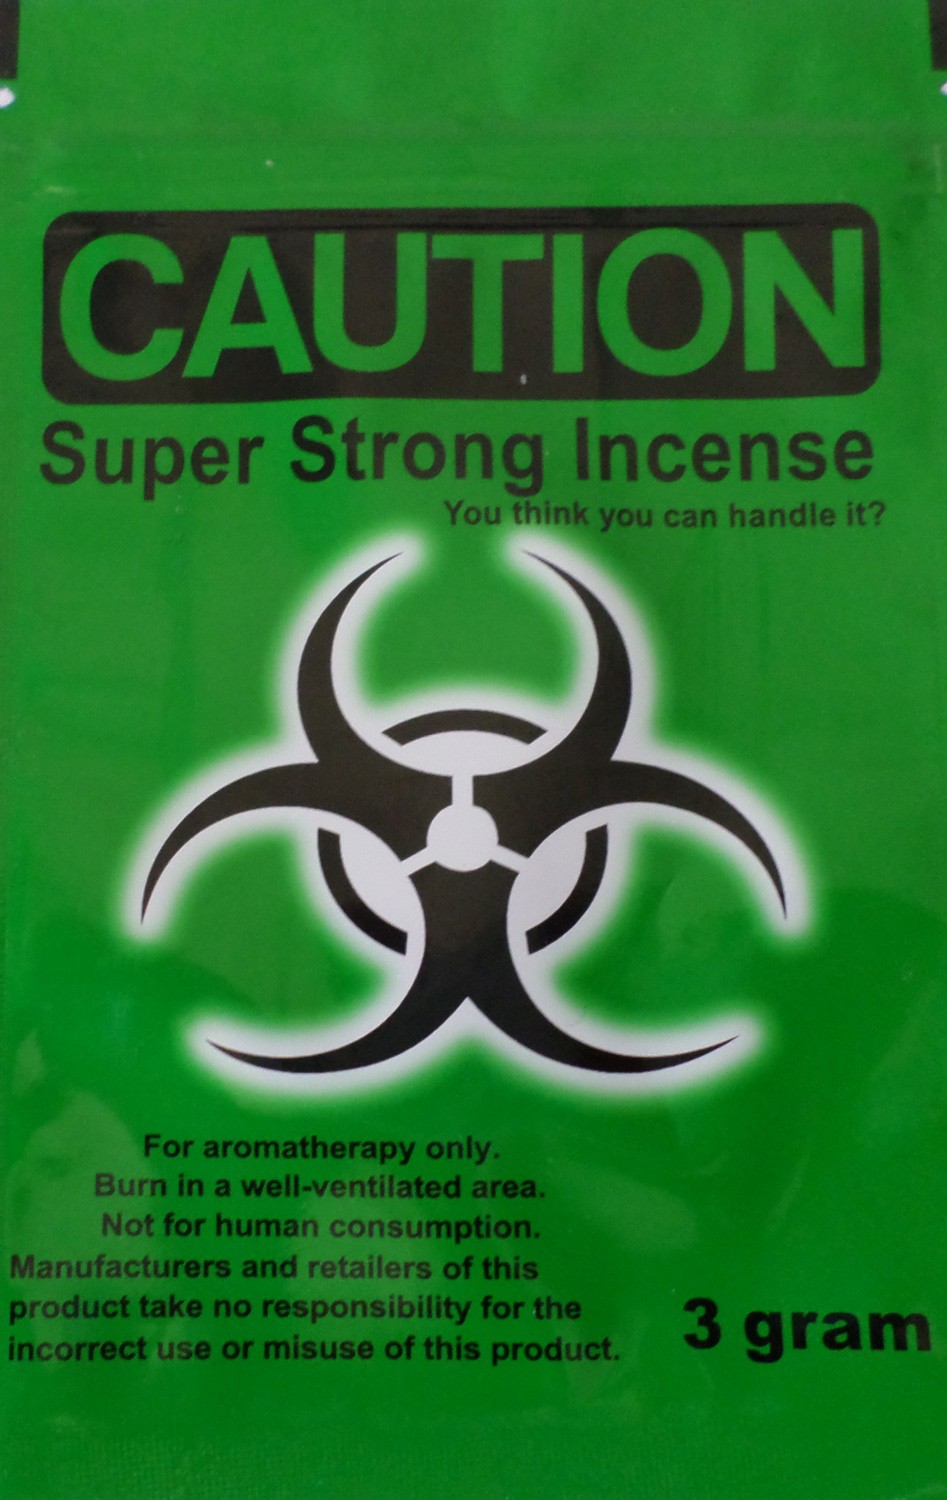 Caution green label 10x pack